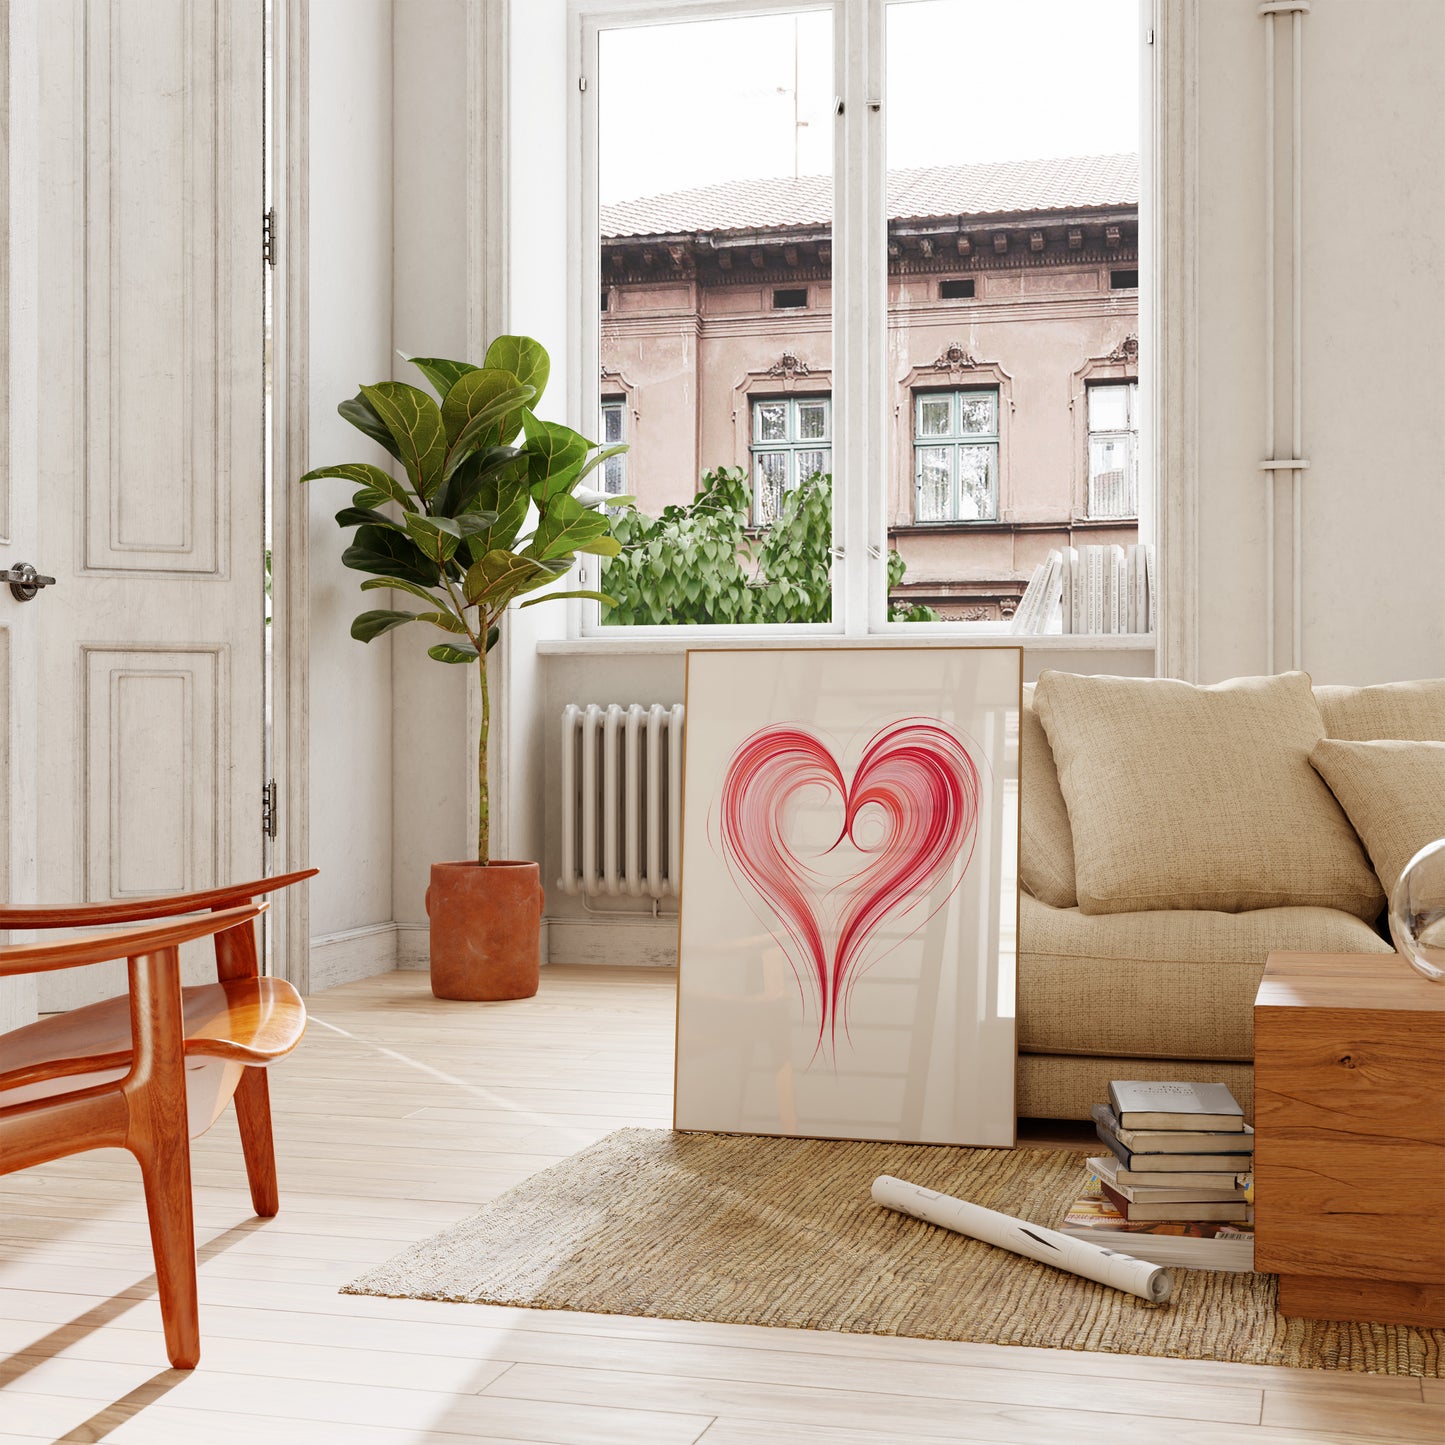 A cozy living room with a heart artwork on the floor and a green plant beside a sofa.